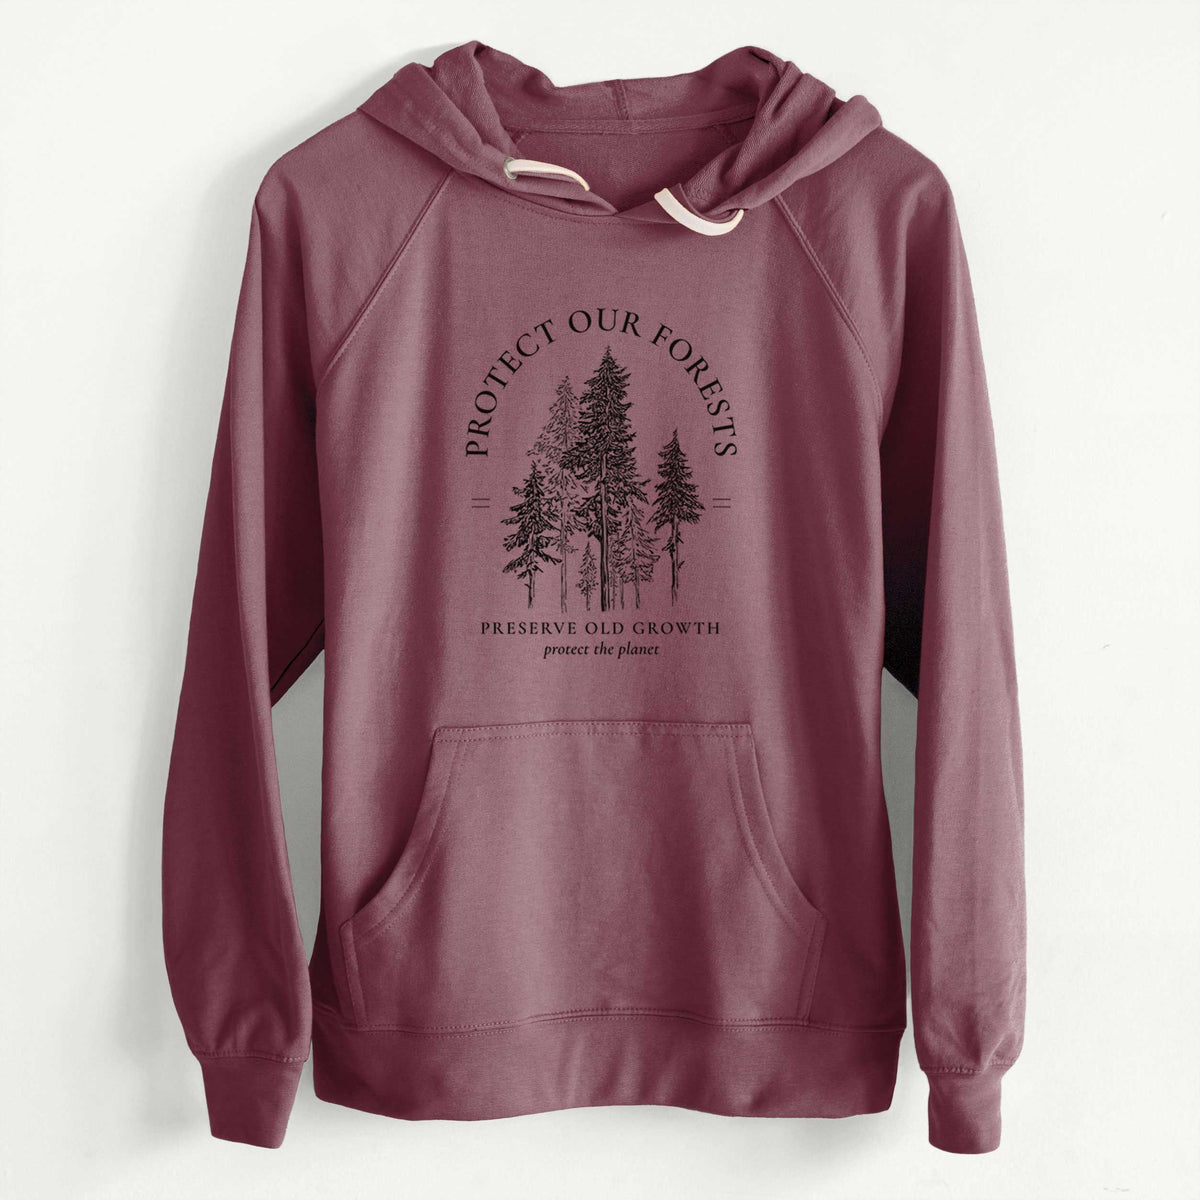 Protect our Forests - Preserve Old Growth  - Slim Fit Loopback Terry Hoodie